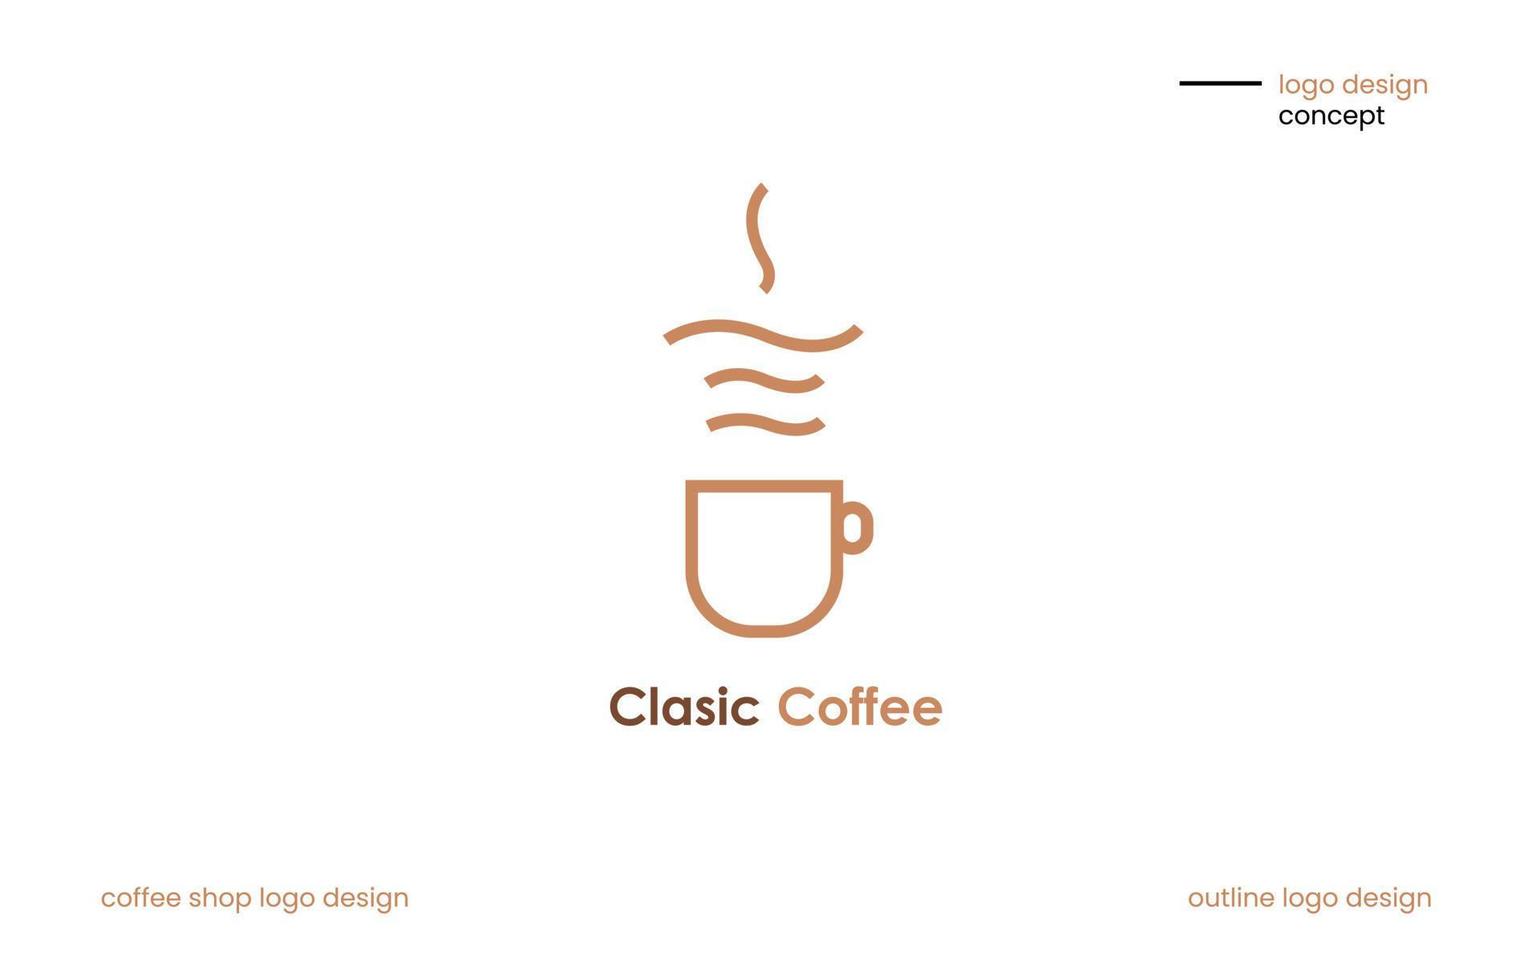 logo design or can be used for ilustration in a coffee shop. simple logo design with ilustration of a coffee cup. vector